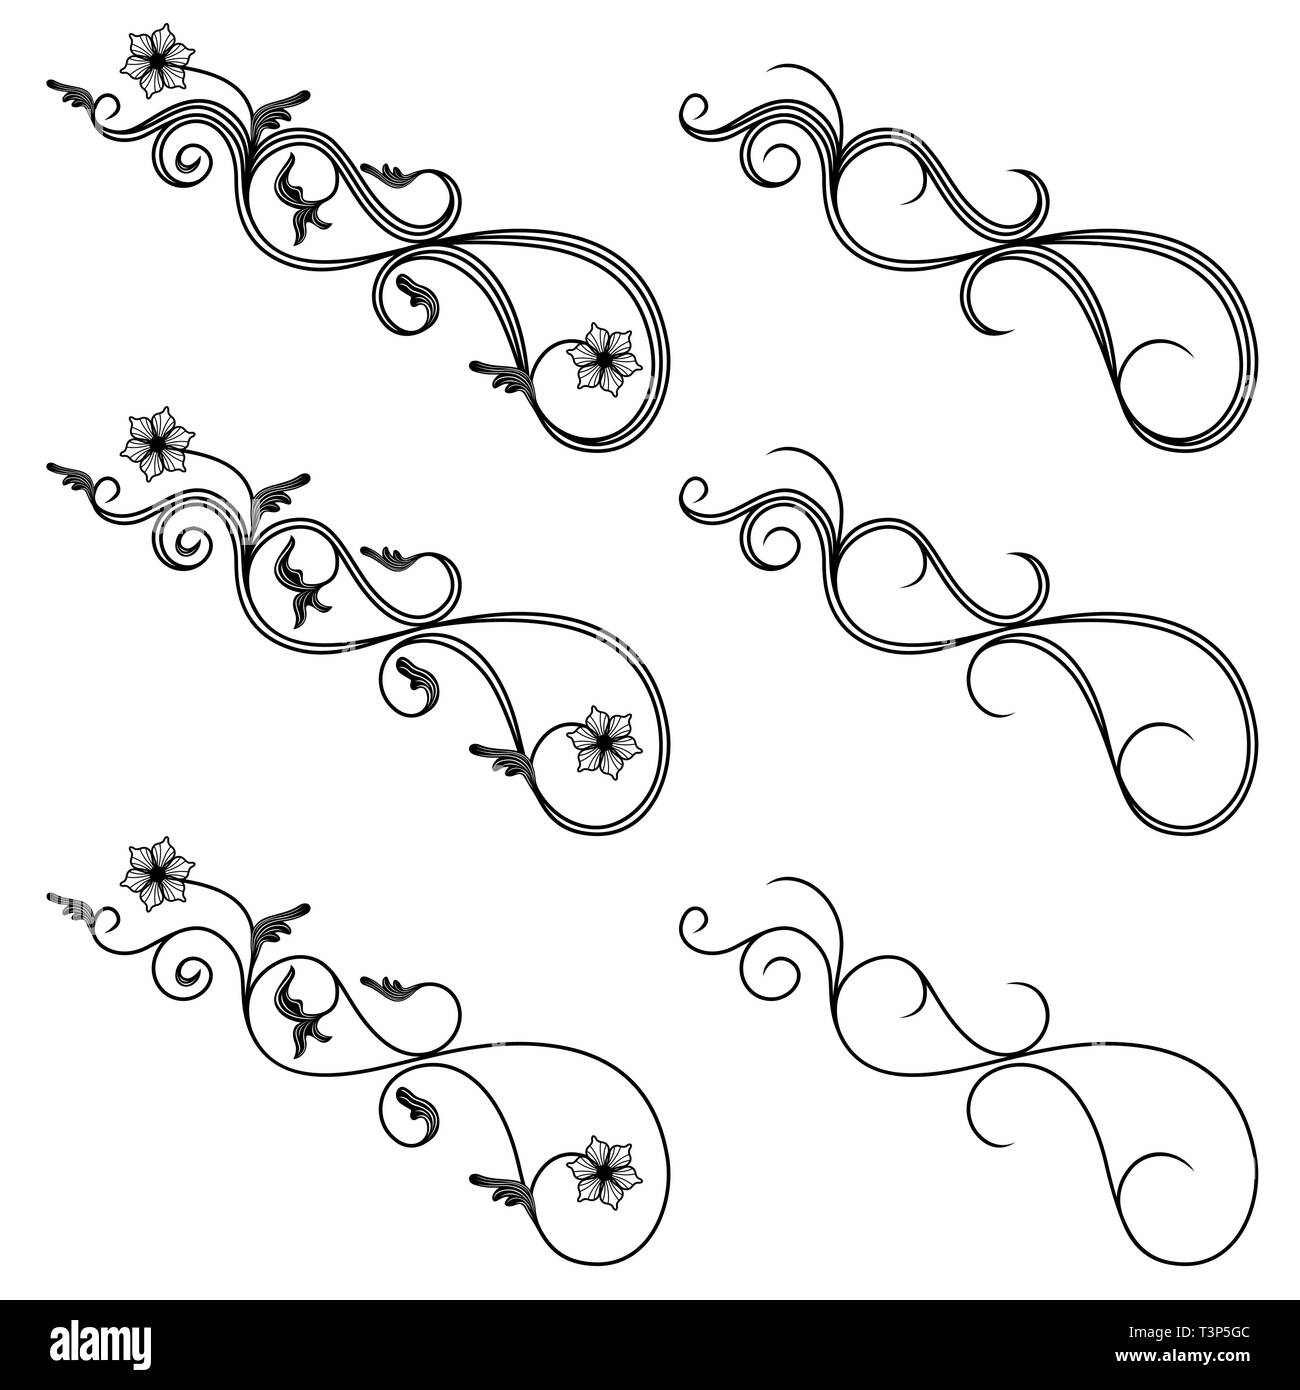 Set of border swirl design elements for frame and others, hand drawn vector illustrations Stock Vector